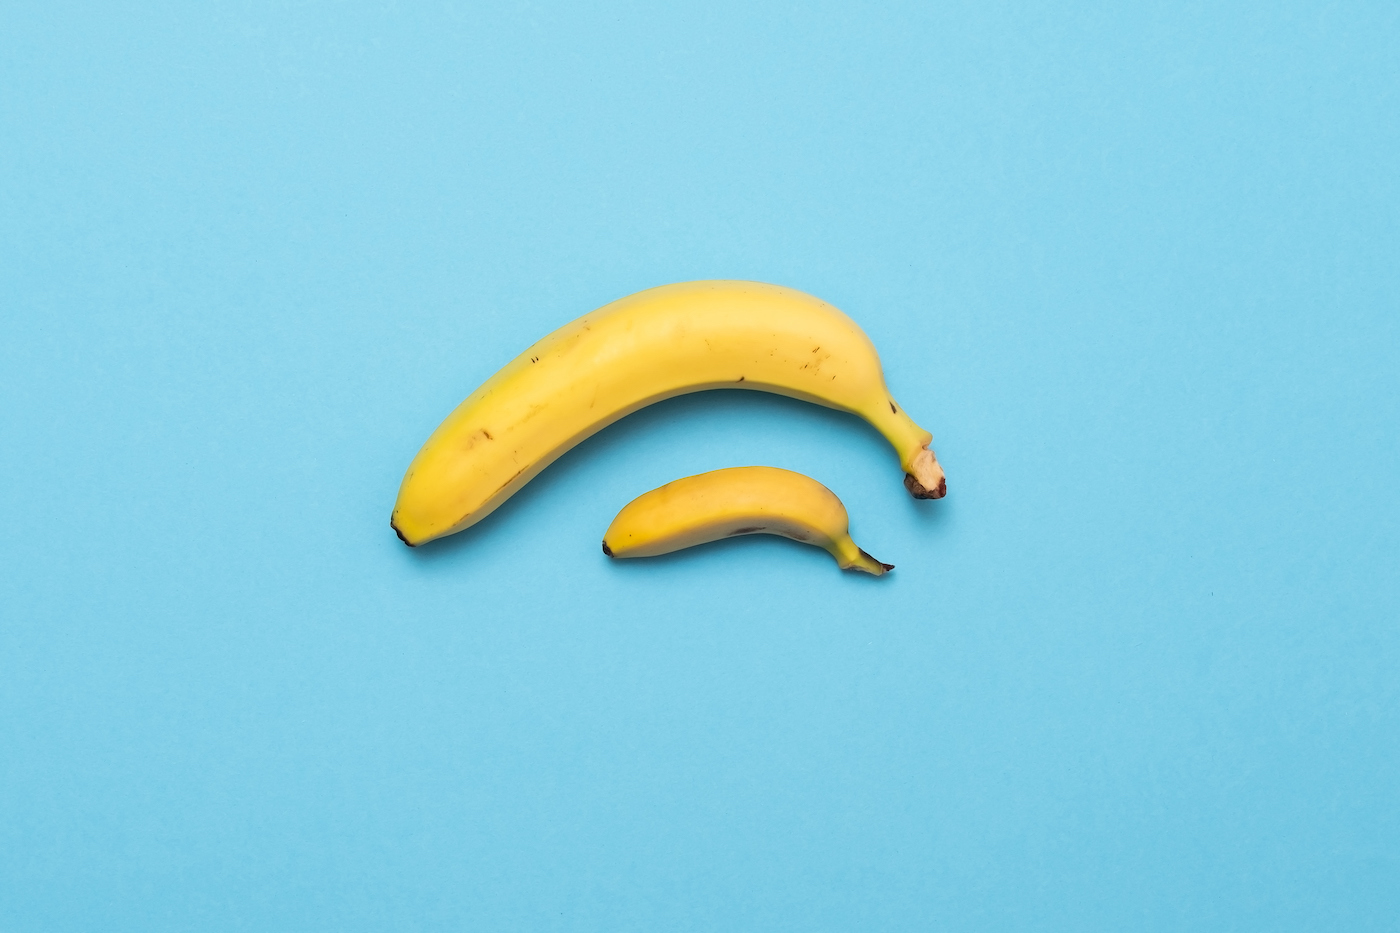 baby banana compare size with banana on blue background.  penis size concept